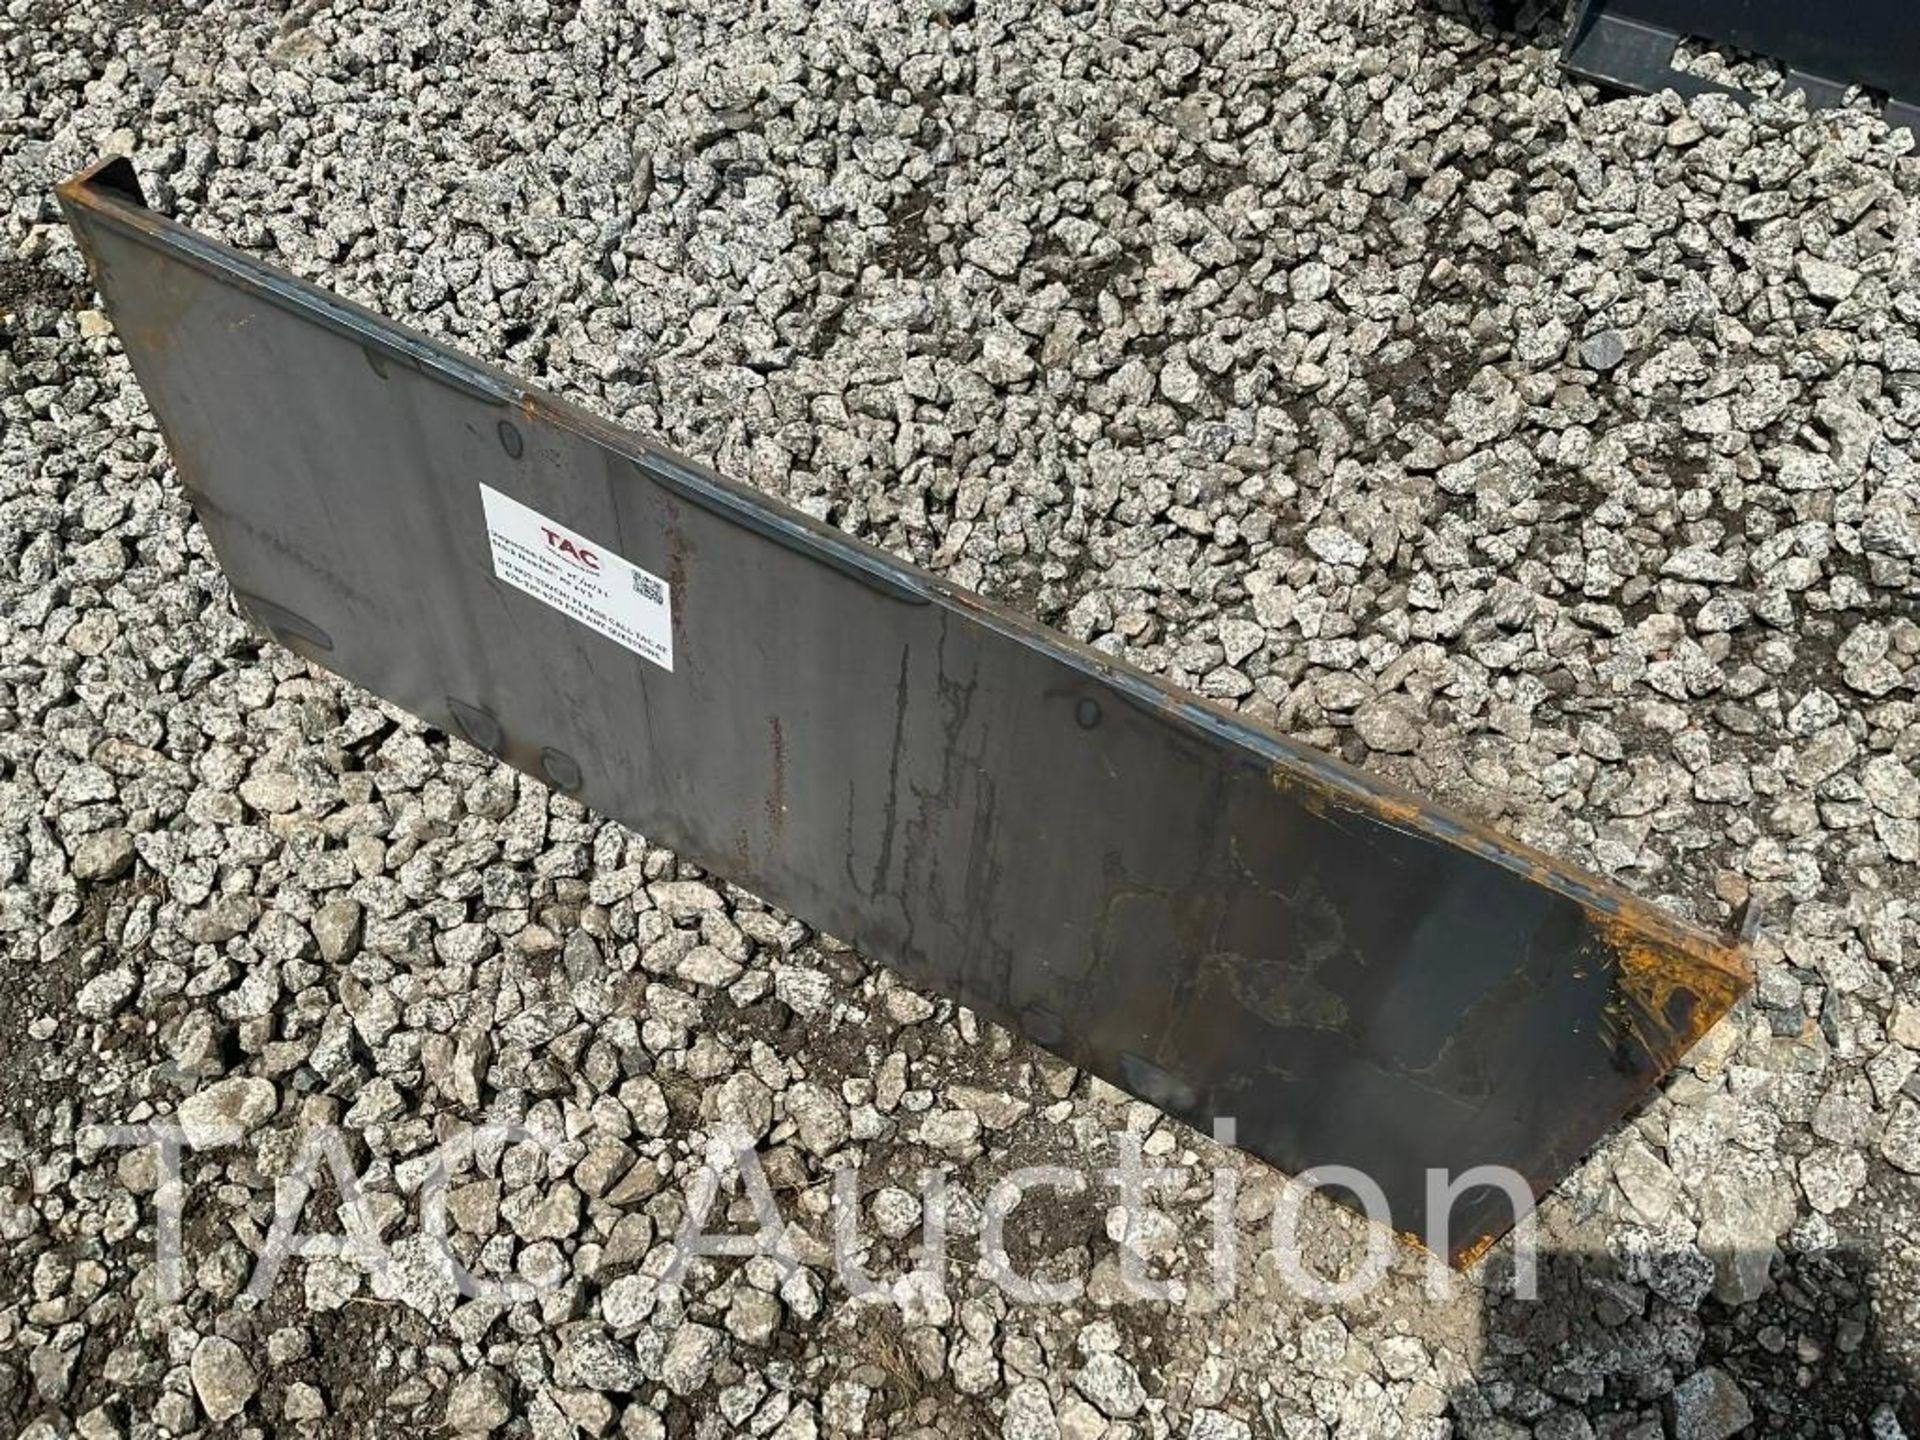 New 2023 Universal Full Face Skid Steer Attachment Plate - Image 2 of 3